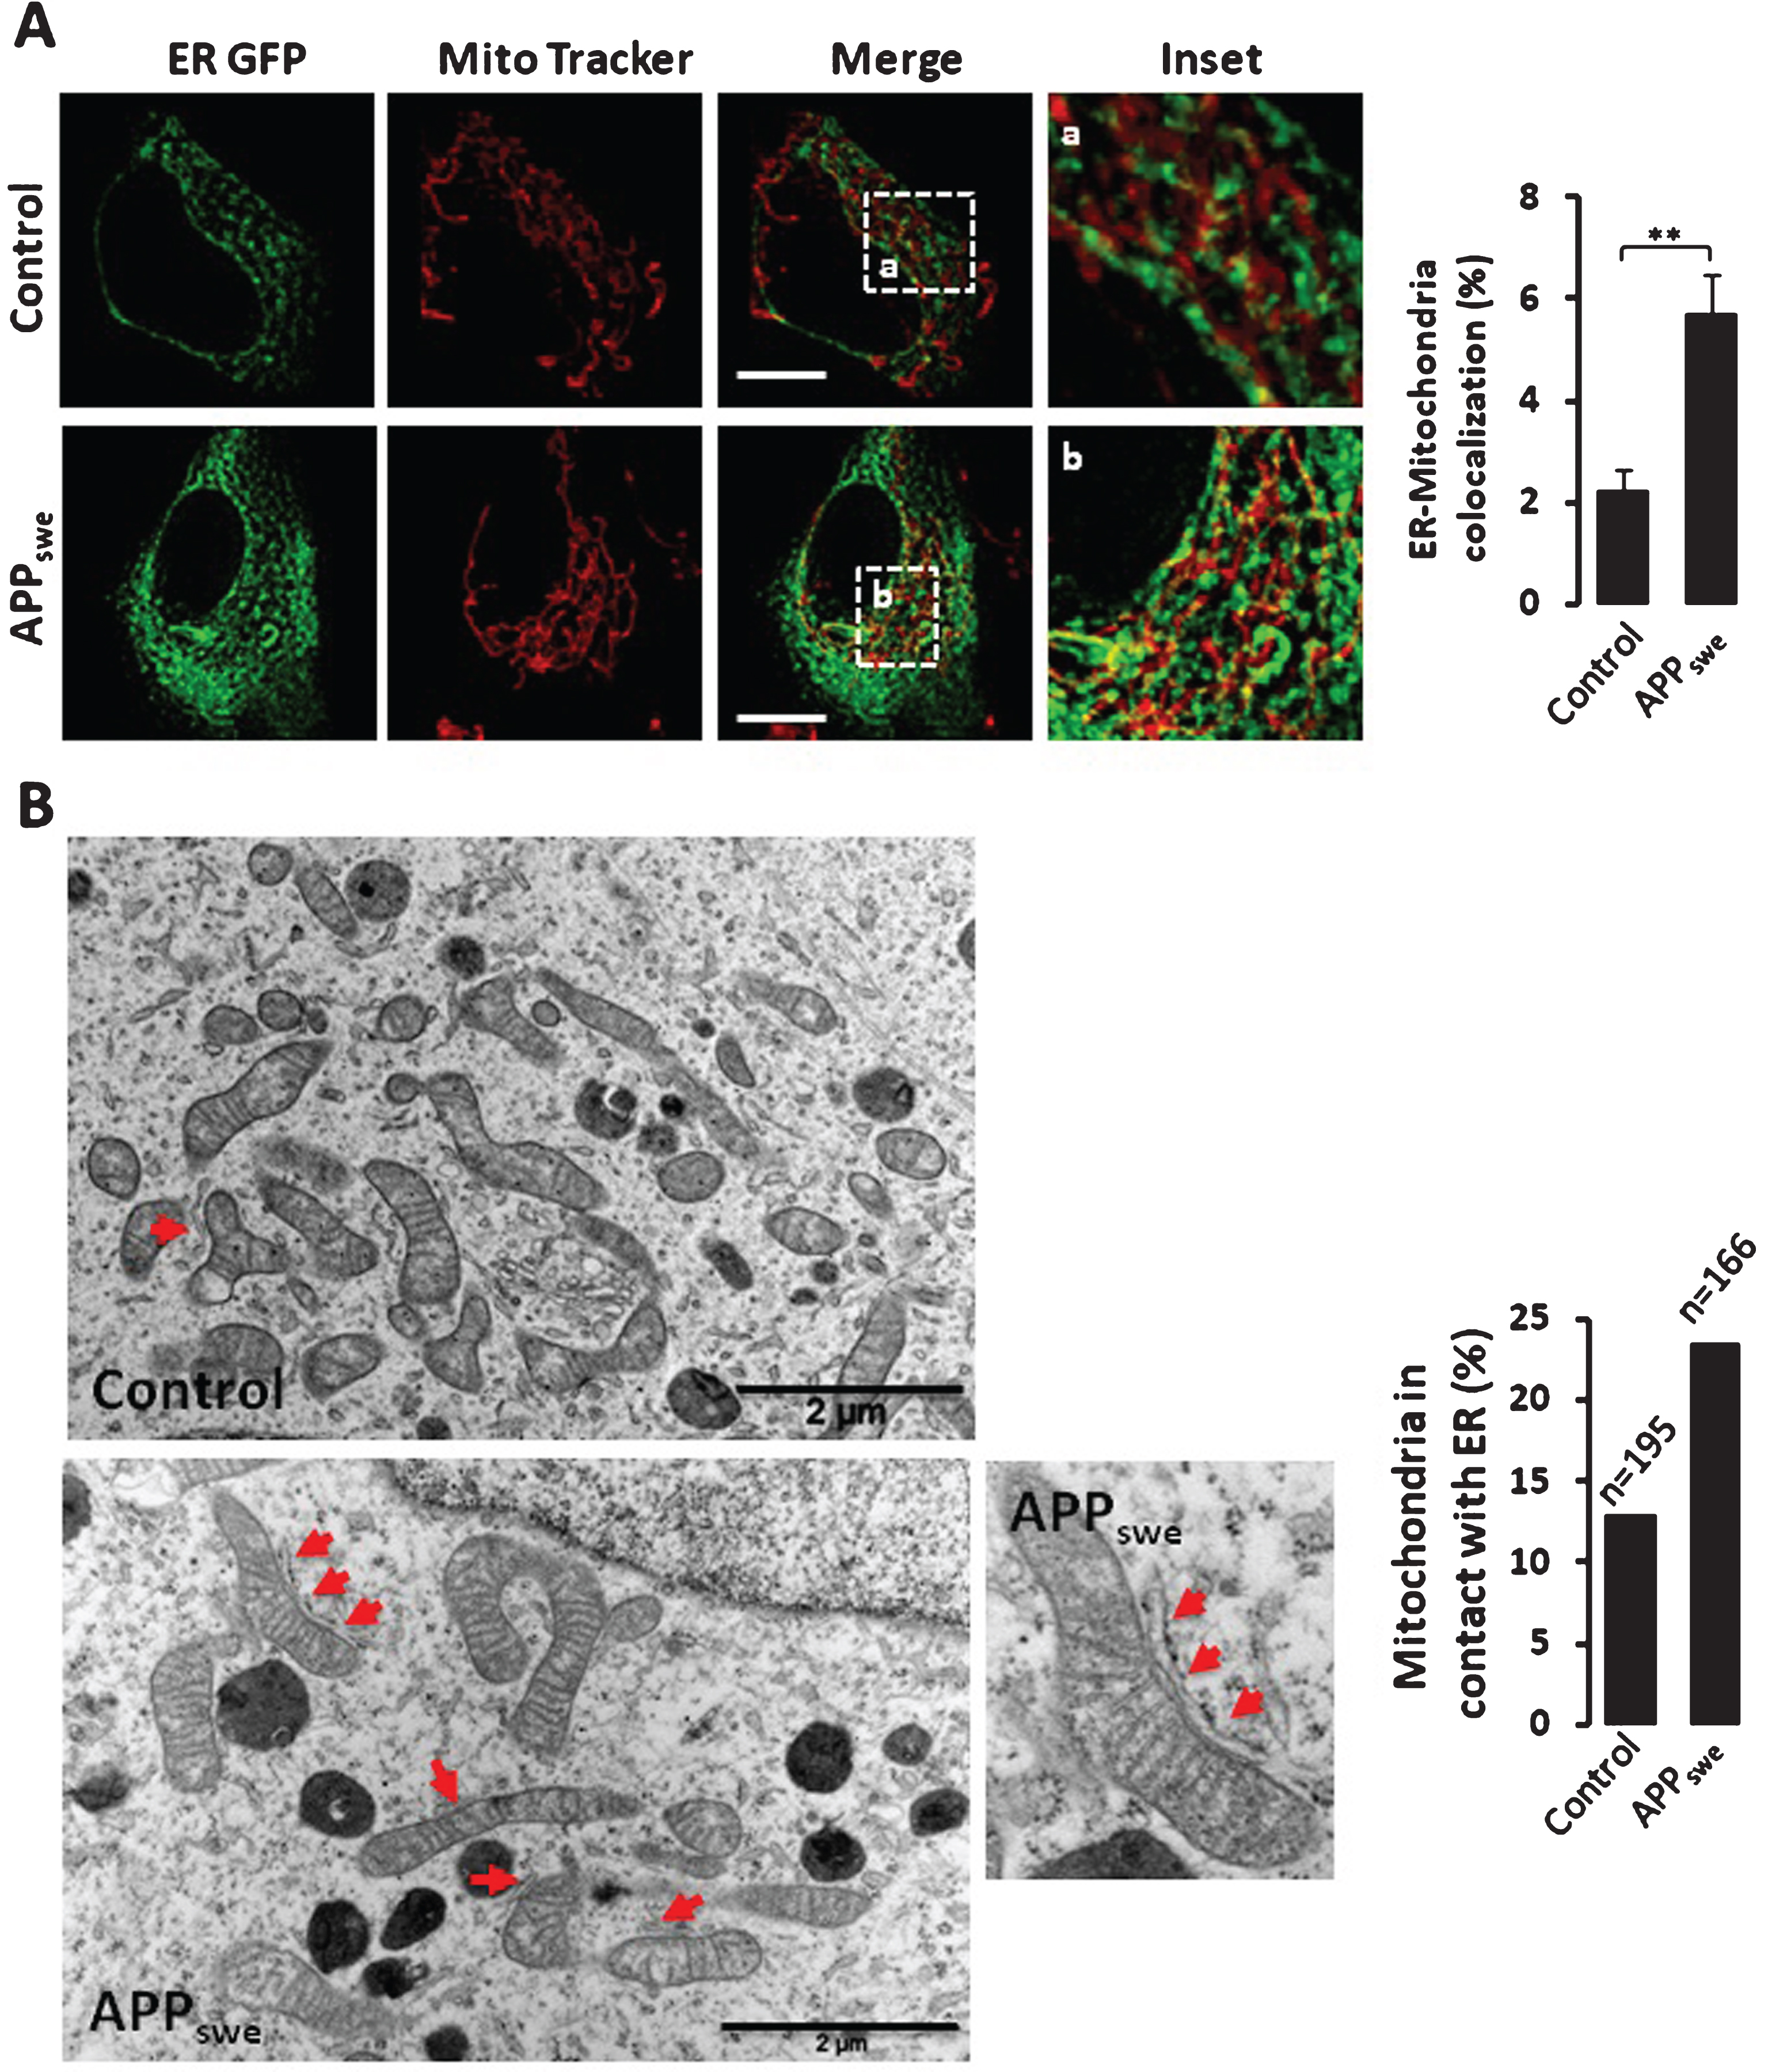 Increased ER-mitochondria contact sites in 
SH-SY5Y cells expressing APPswe. A) Quantitative analyses of the colocalization of ER and 
mitochondria in SH-SY5Y live cells expressing pcDNA3.1 [Control (n = 4) or APPswe 
(n = 7)]. ER is visualized by transfecting ER GFP (green). Mitochondria are stained with Mitotracker 
Deep red dye (red). Merge images show overlay of green and red signals. Insets (magnified overlay) showing ER and 
mitochondria colocalization depicted in yellow. The graph represents the quantification of ER and mitochondria 
colocalization presented as percentage of total mitochondrial volume (% mean±S.E.M.). **p 
value < 0.01 using Student’s t test. Scale bars represent 5 μm. B) Representative electron 
microscopy micrographs of control and APPswe expressing cells. Red arrows show mitochondria in 
contacts with ER. High magnificence of ER-mitochondria contacts is shown for APPswe cells. Data are 
presented as % of mitochondria in contacts with ER. Quantification was obtained from a total number of 
mitochondria in control (n = 195) and in APPswe expressing cells (n = 166). Scale 
bars represent 2 μm.